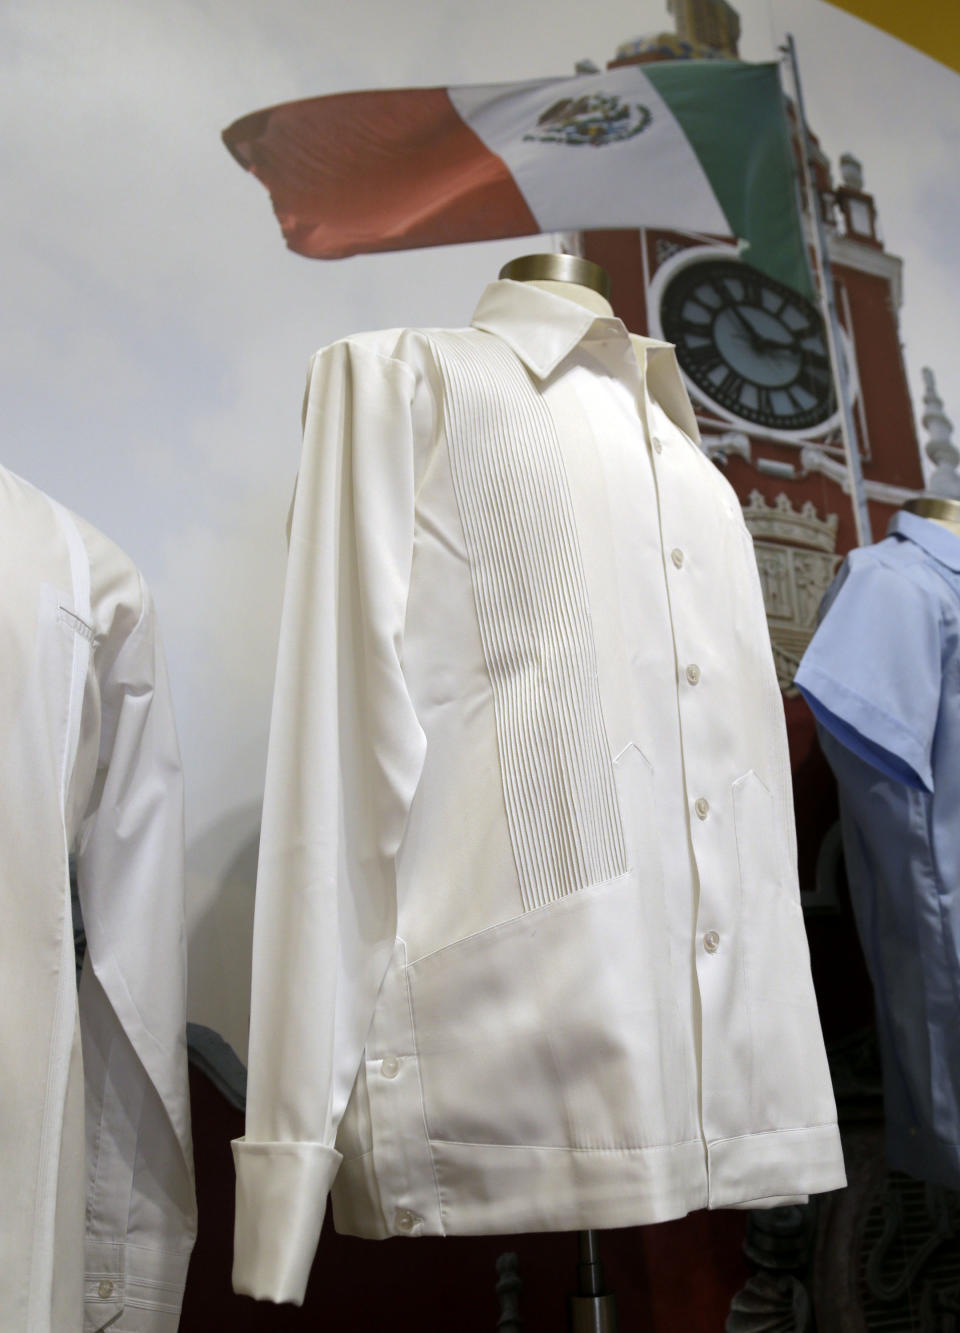 In this Wednesday, Oct. 17, 2012 photo, a guayabera from the 1970s in Mexico worn by then-president Luis Echevarria is on display at an exhibition titled "The Guayabera: A Shirt's Story" at the Museum of History Miami, in Miami. This is the first exhibition to trace the story of the shirt's evolution through Cuba, Mexico, and the United States. (AP Photo/Lynne Sladky)